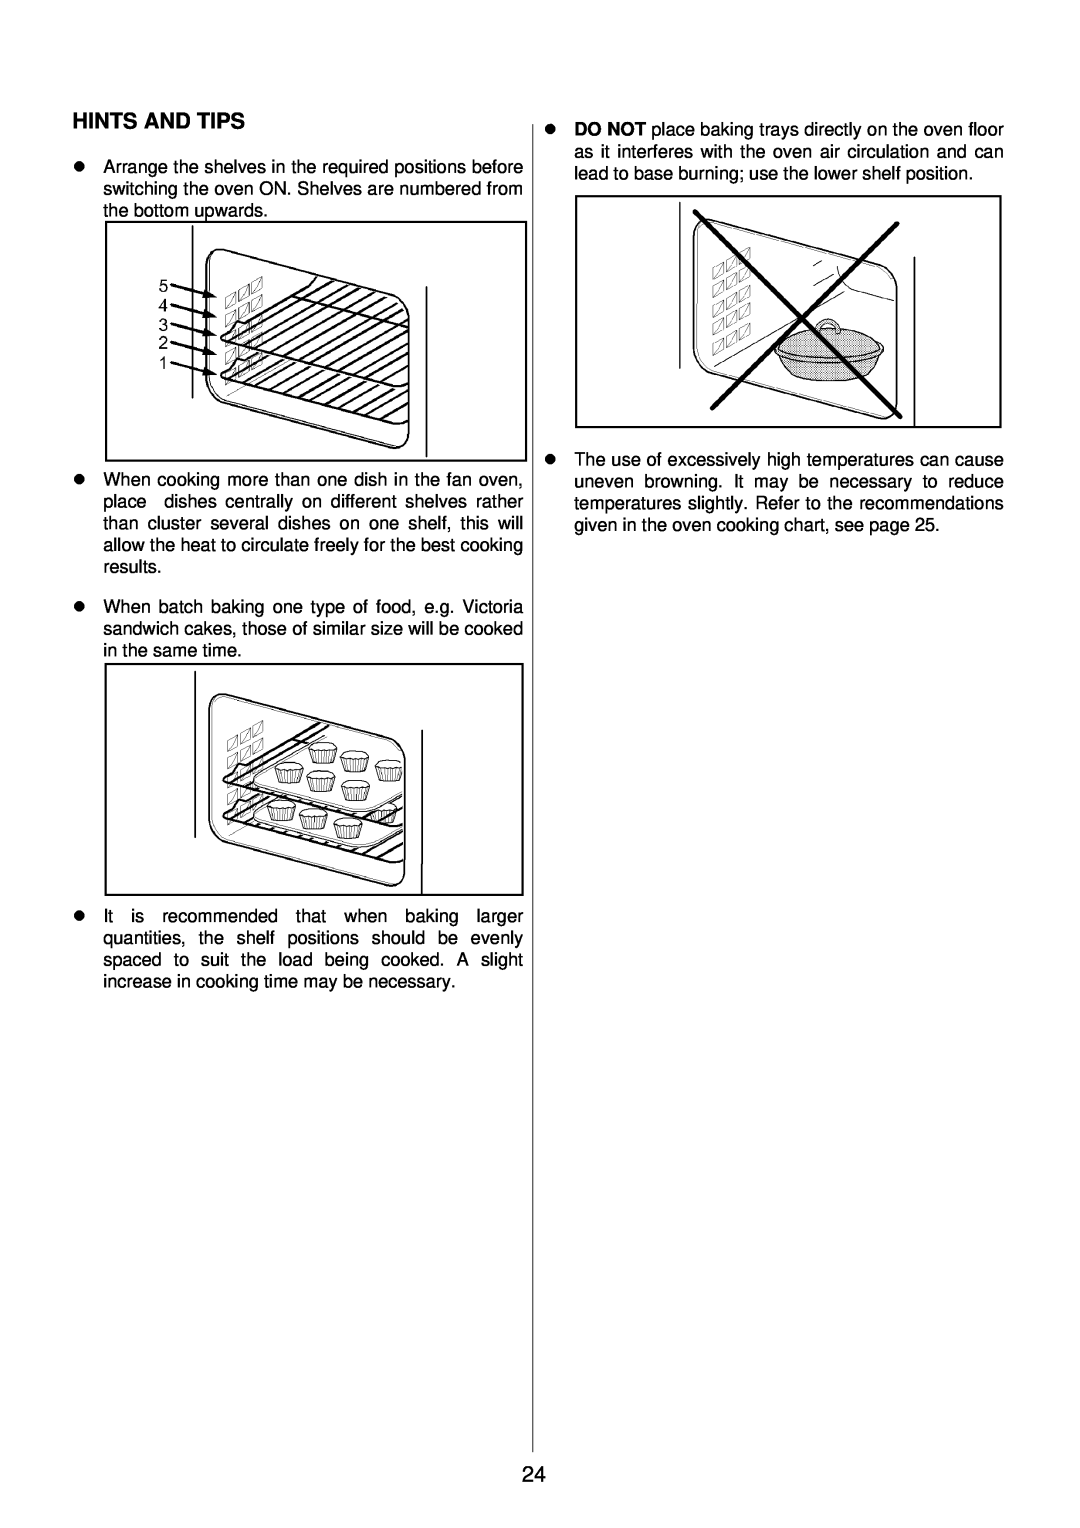 Tricity Bendix TBD913 installation instructions lHINTS AND TIPS, l in the same time 